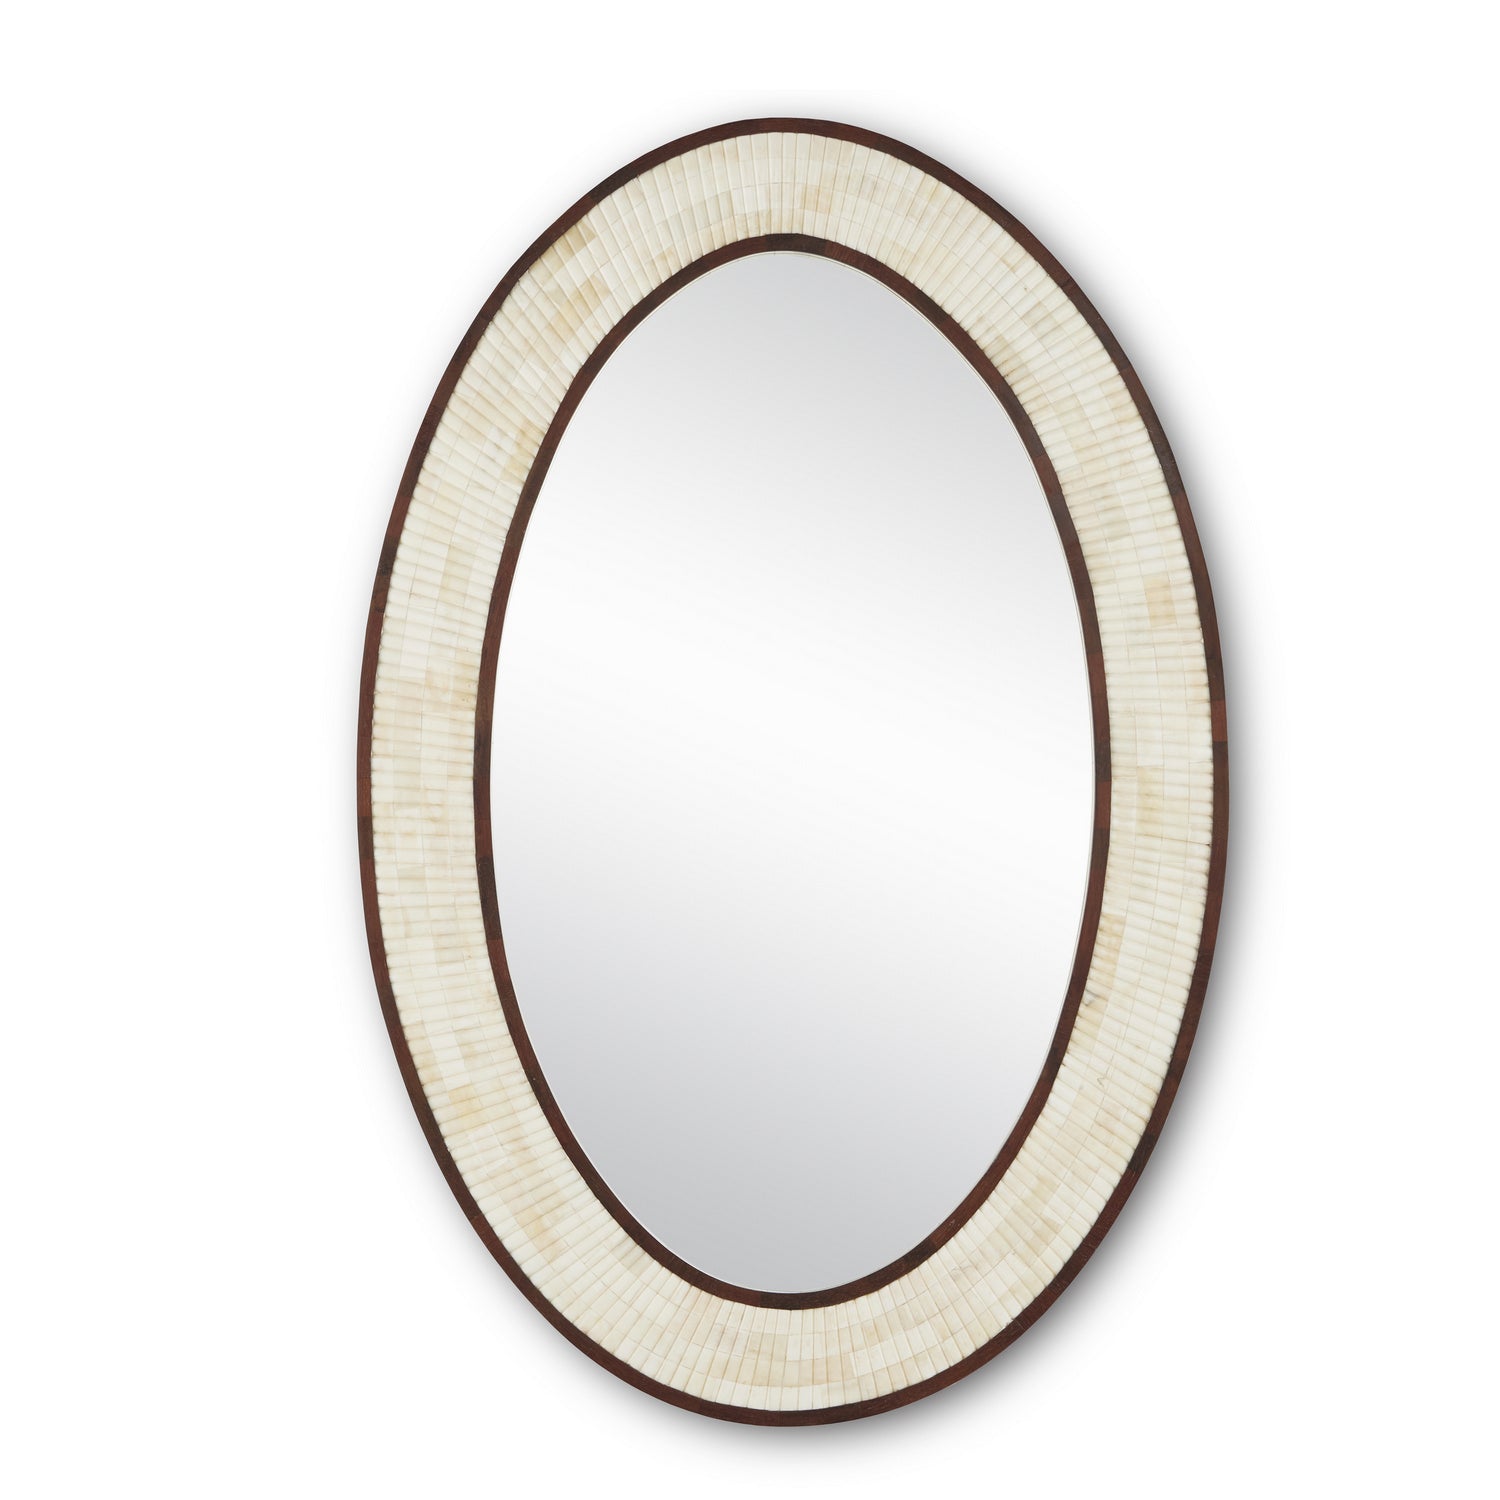 Mirror from the Andar collection in Natural/Dark Walnut/Mirror finish